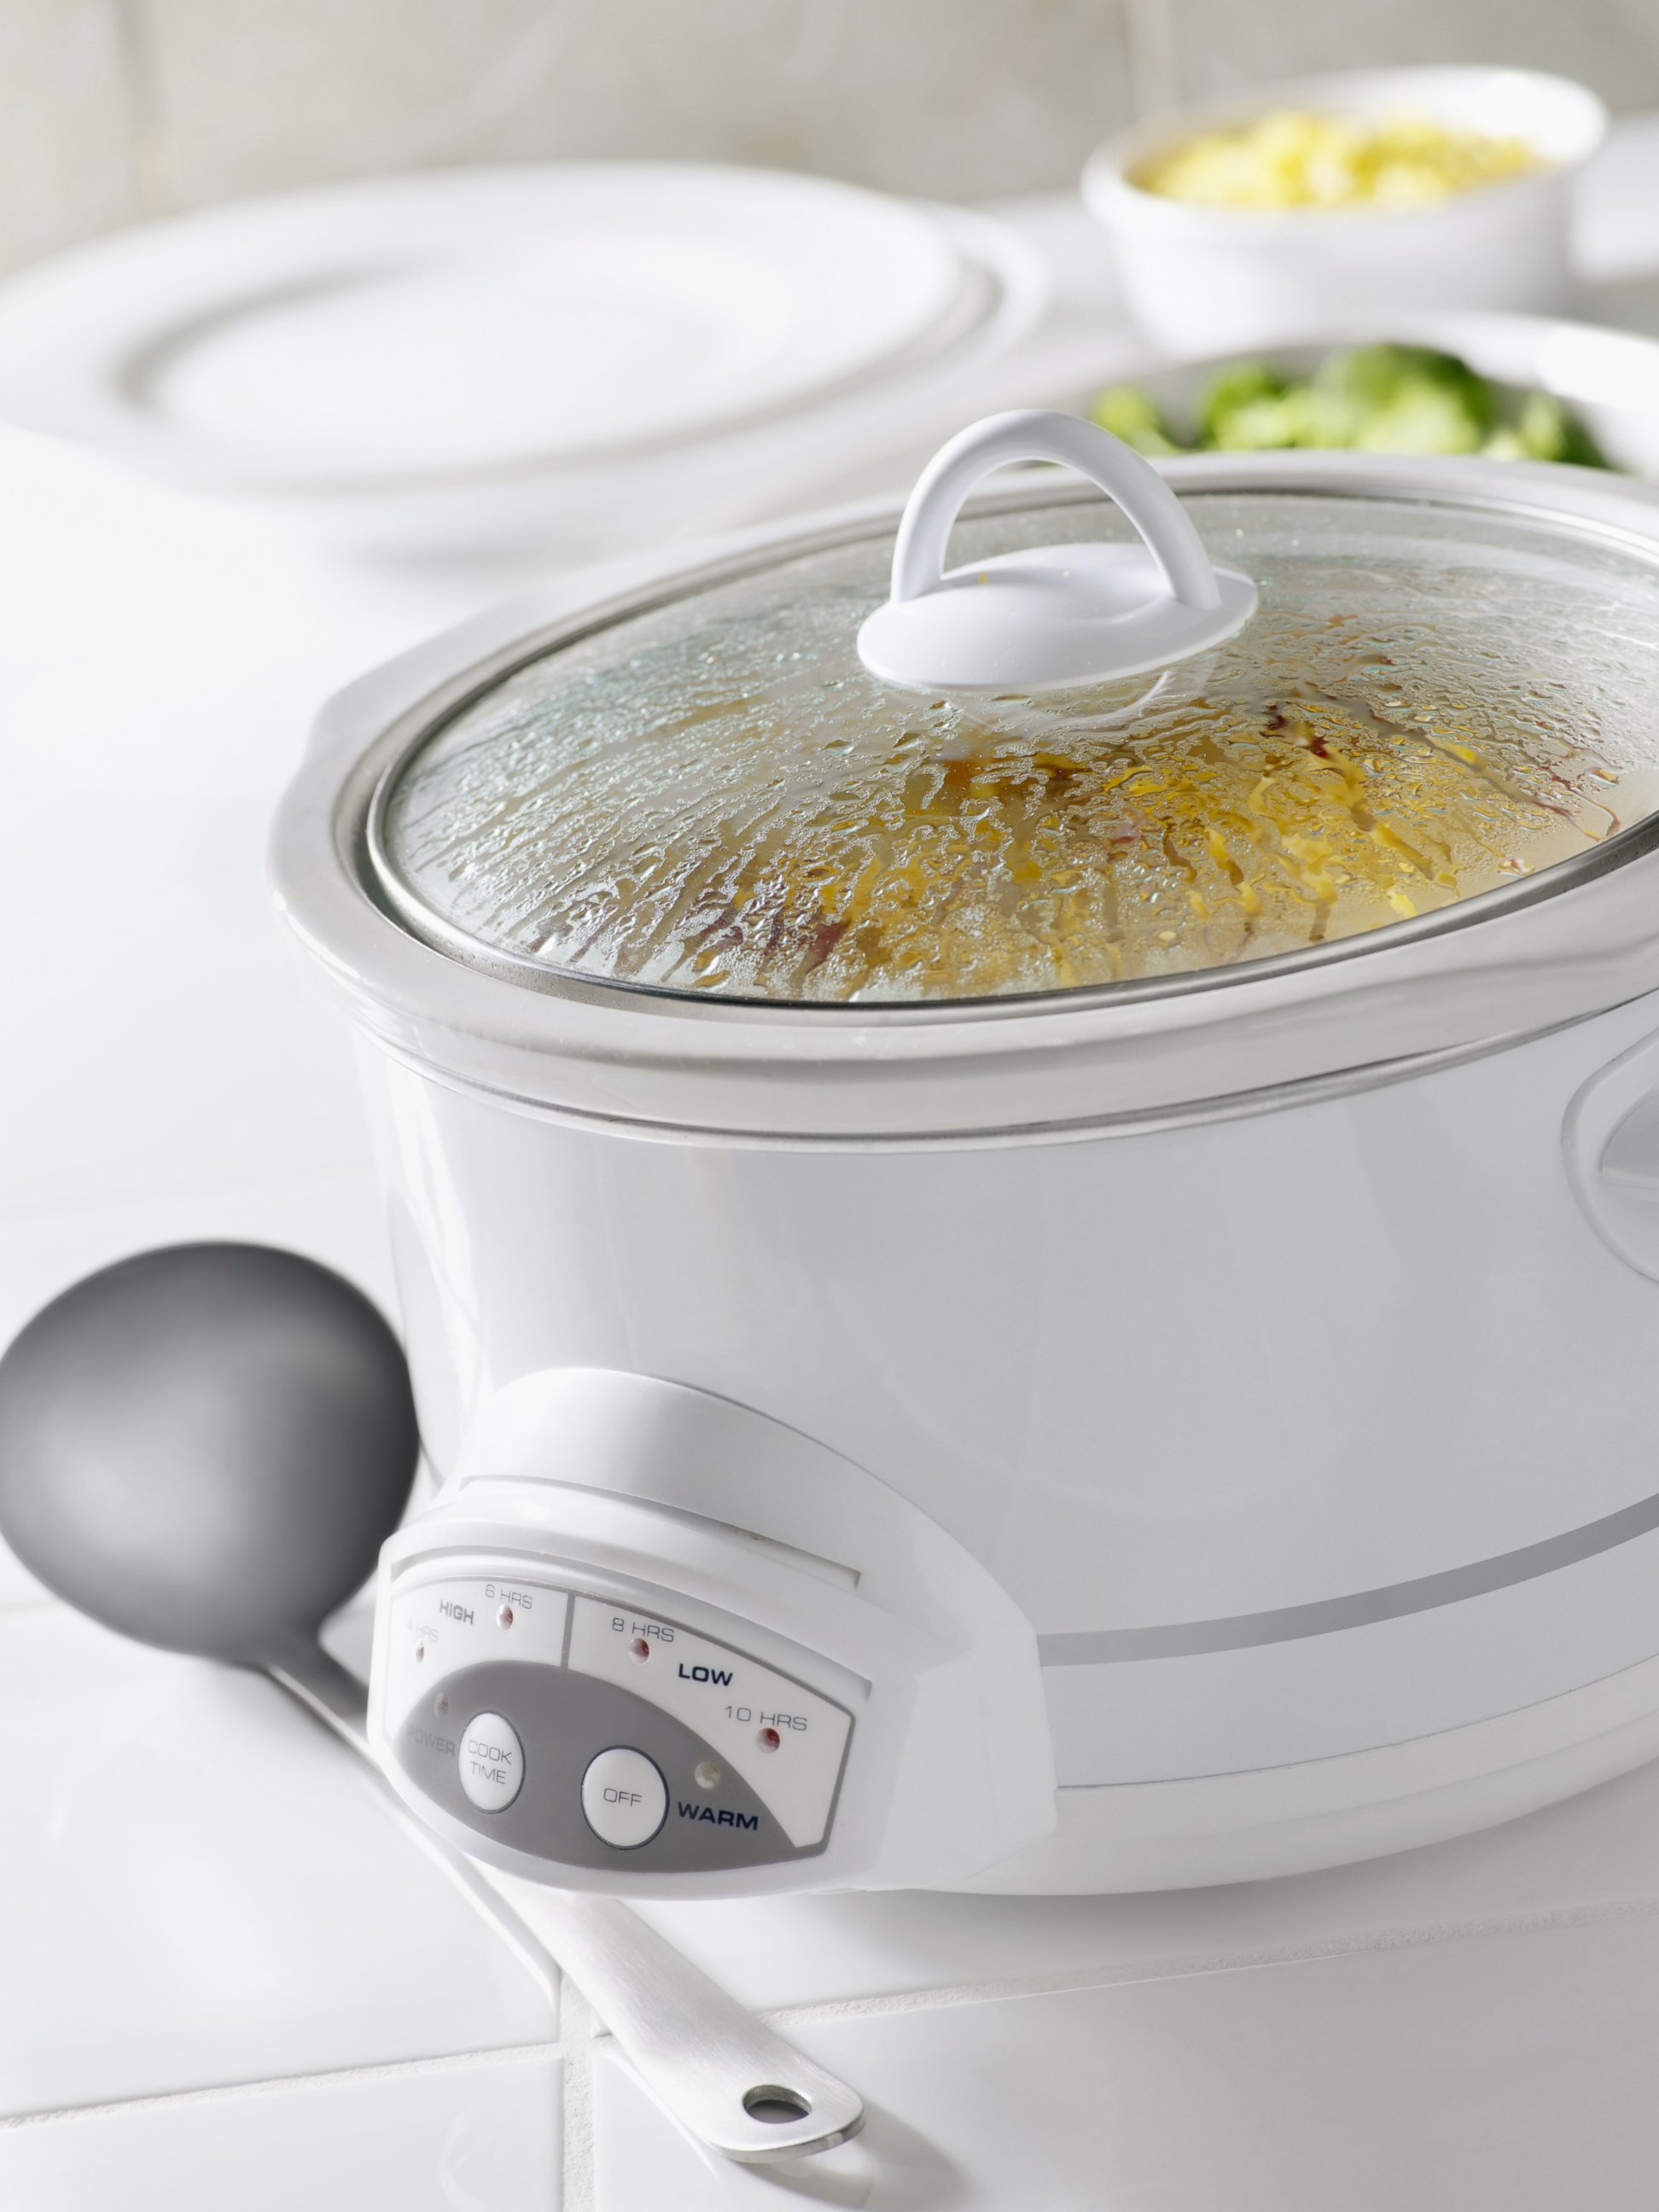 PHOTO: Potatoes cook in a crock pot in this stock image.